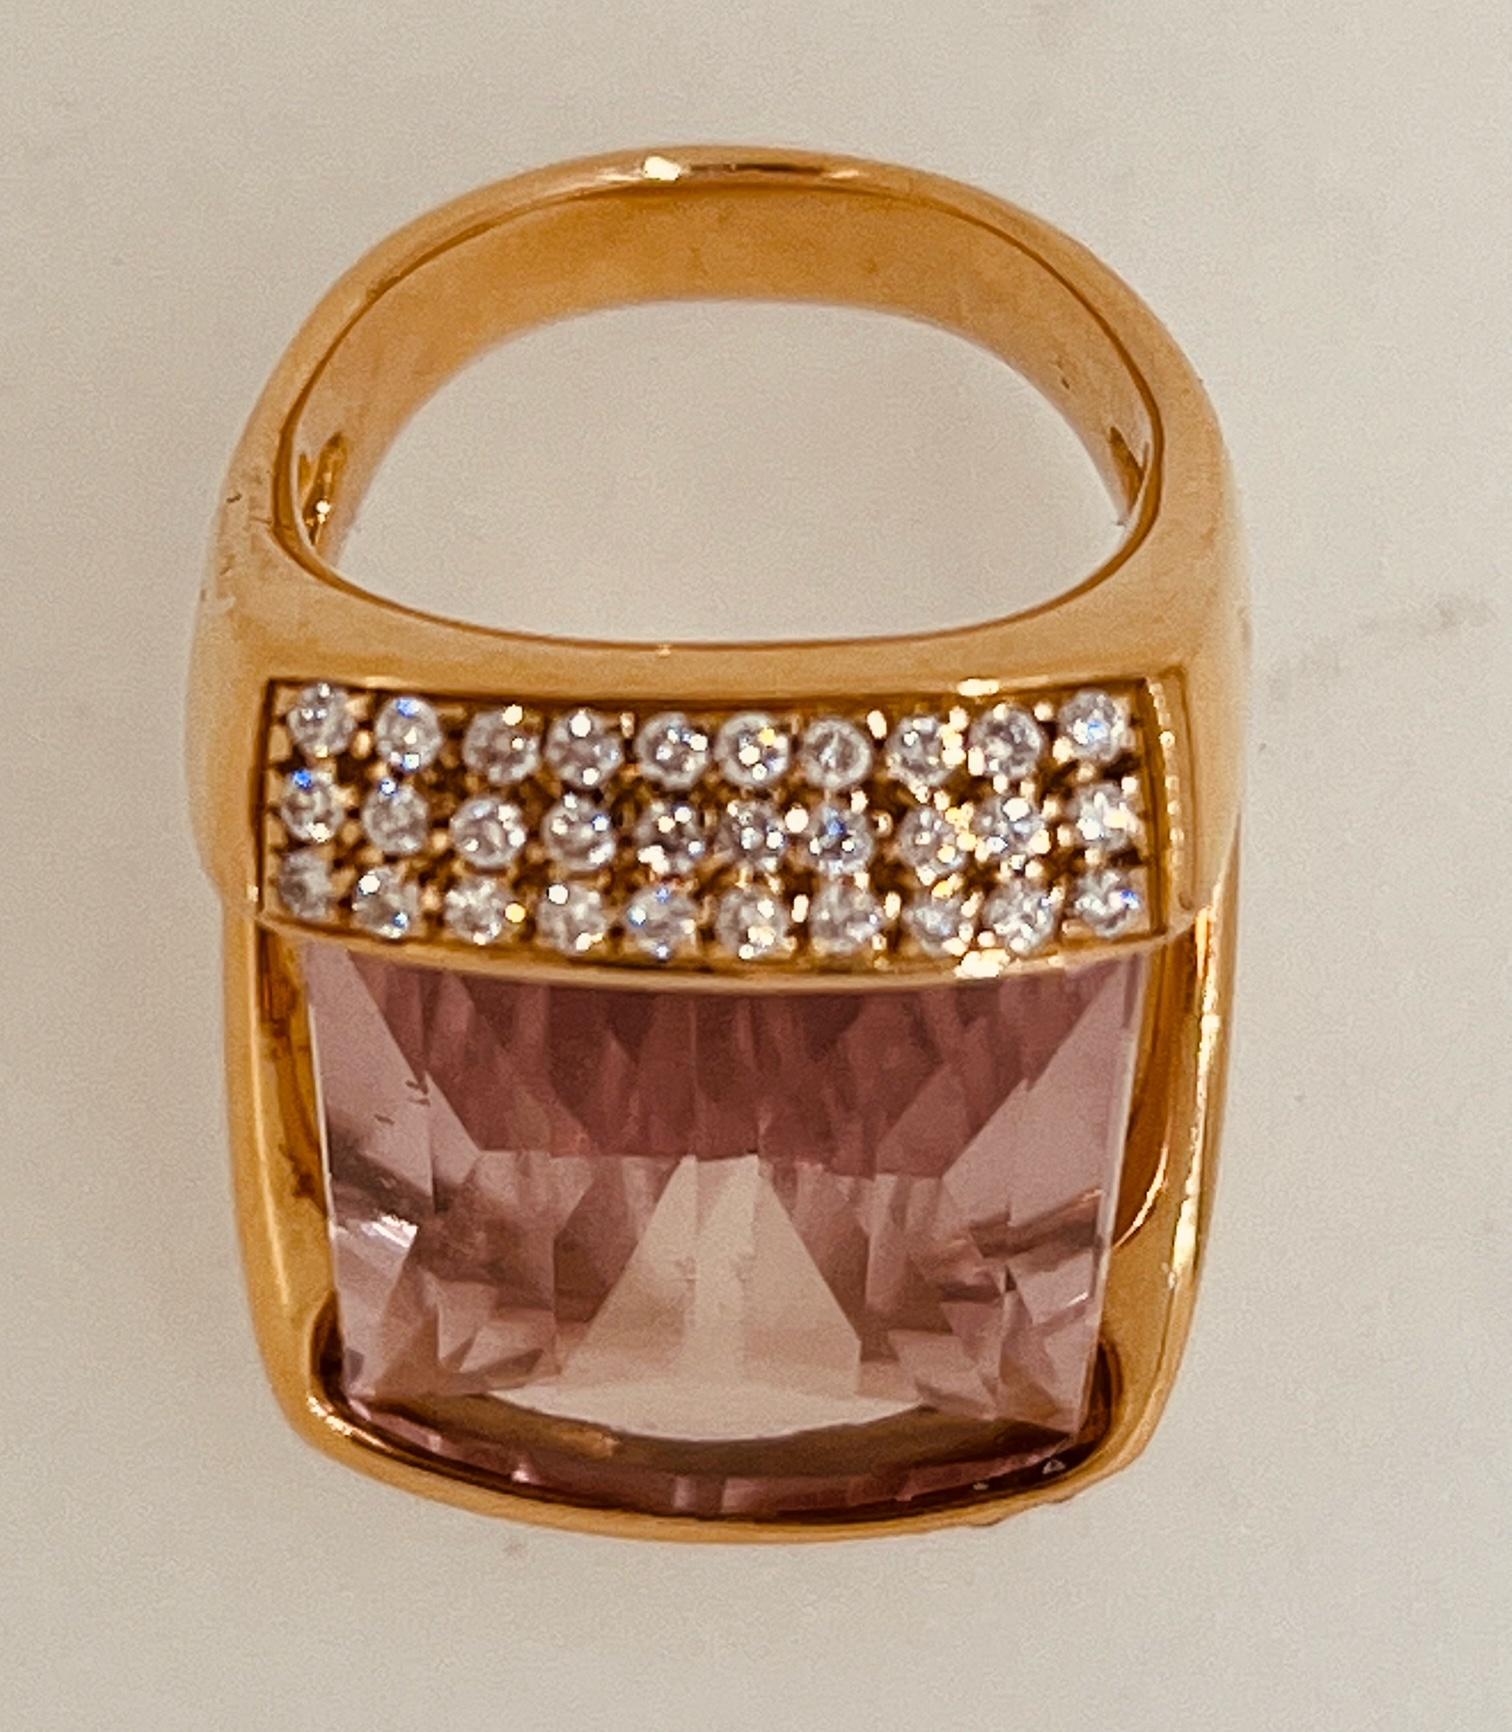 18ct Gold Ring Centering a Square Cut Morganite Suspended by 0.9ct Pave Diamonds For Sale 4